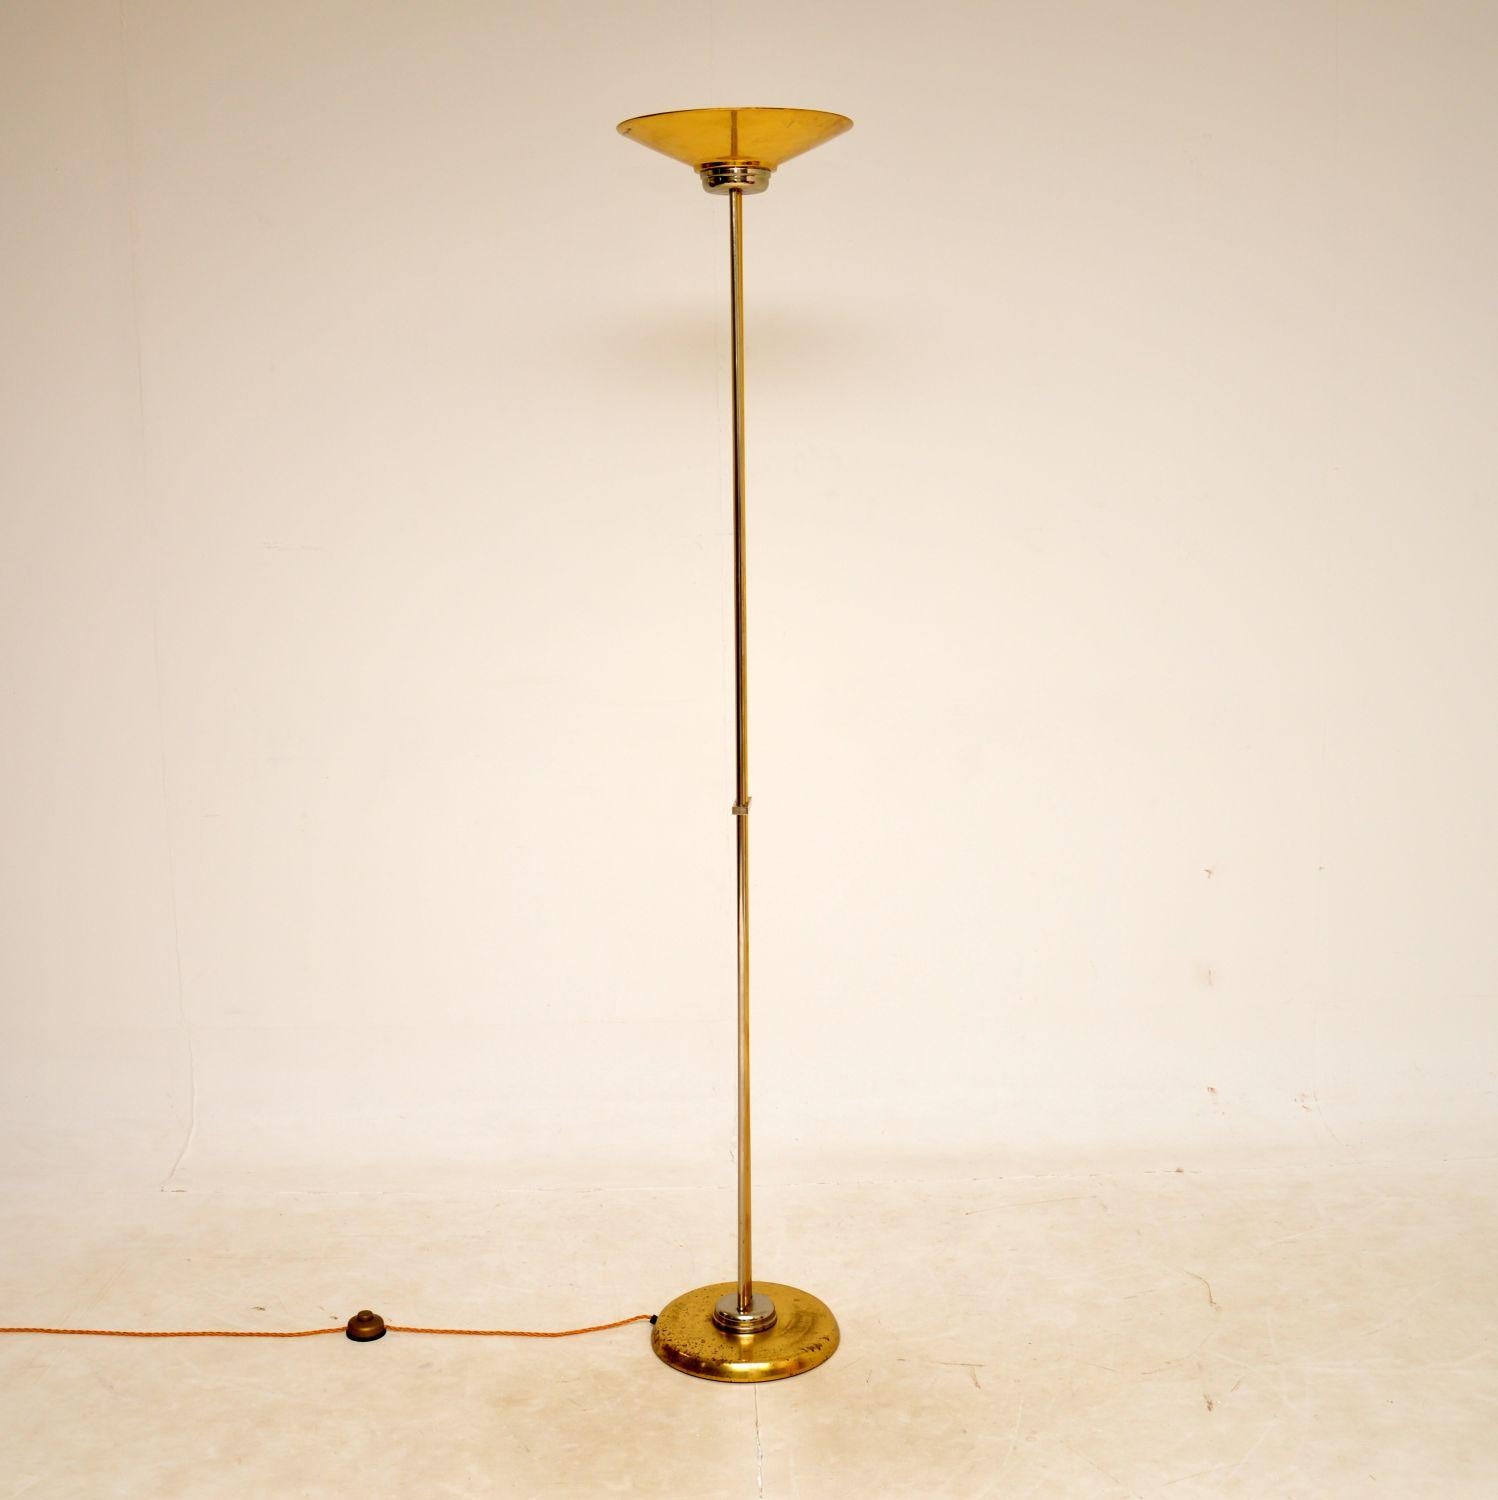 A beautiful and extremely well made 1970’s vintage Italian brass & chrome lamp.

The quality is outstanding, the frame is beautifully designed and the metal has acquired a beautiful patina over the years.

We have had this re-wired, it is in good